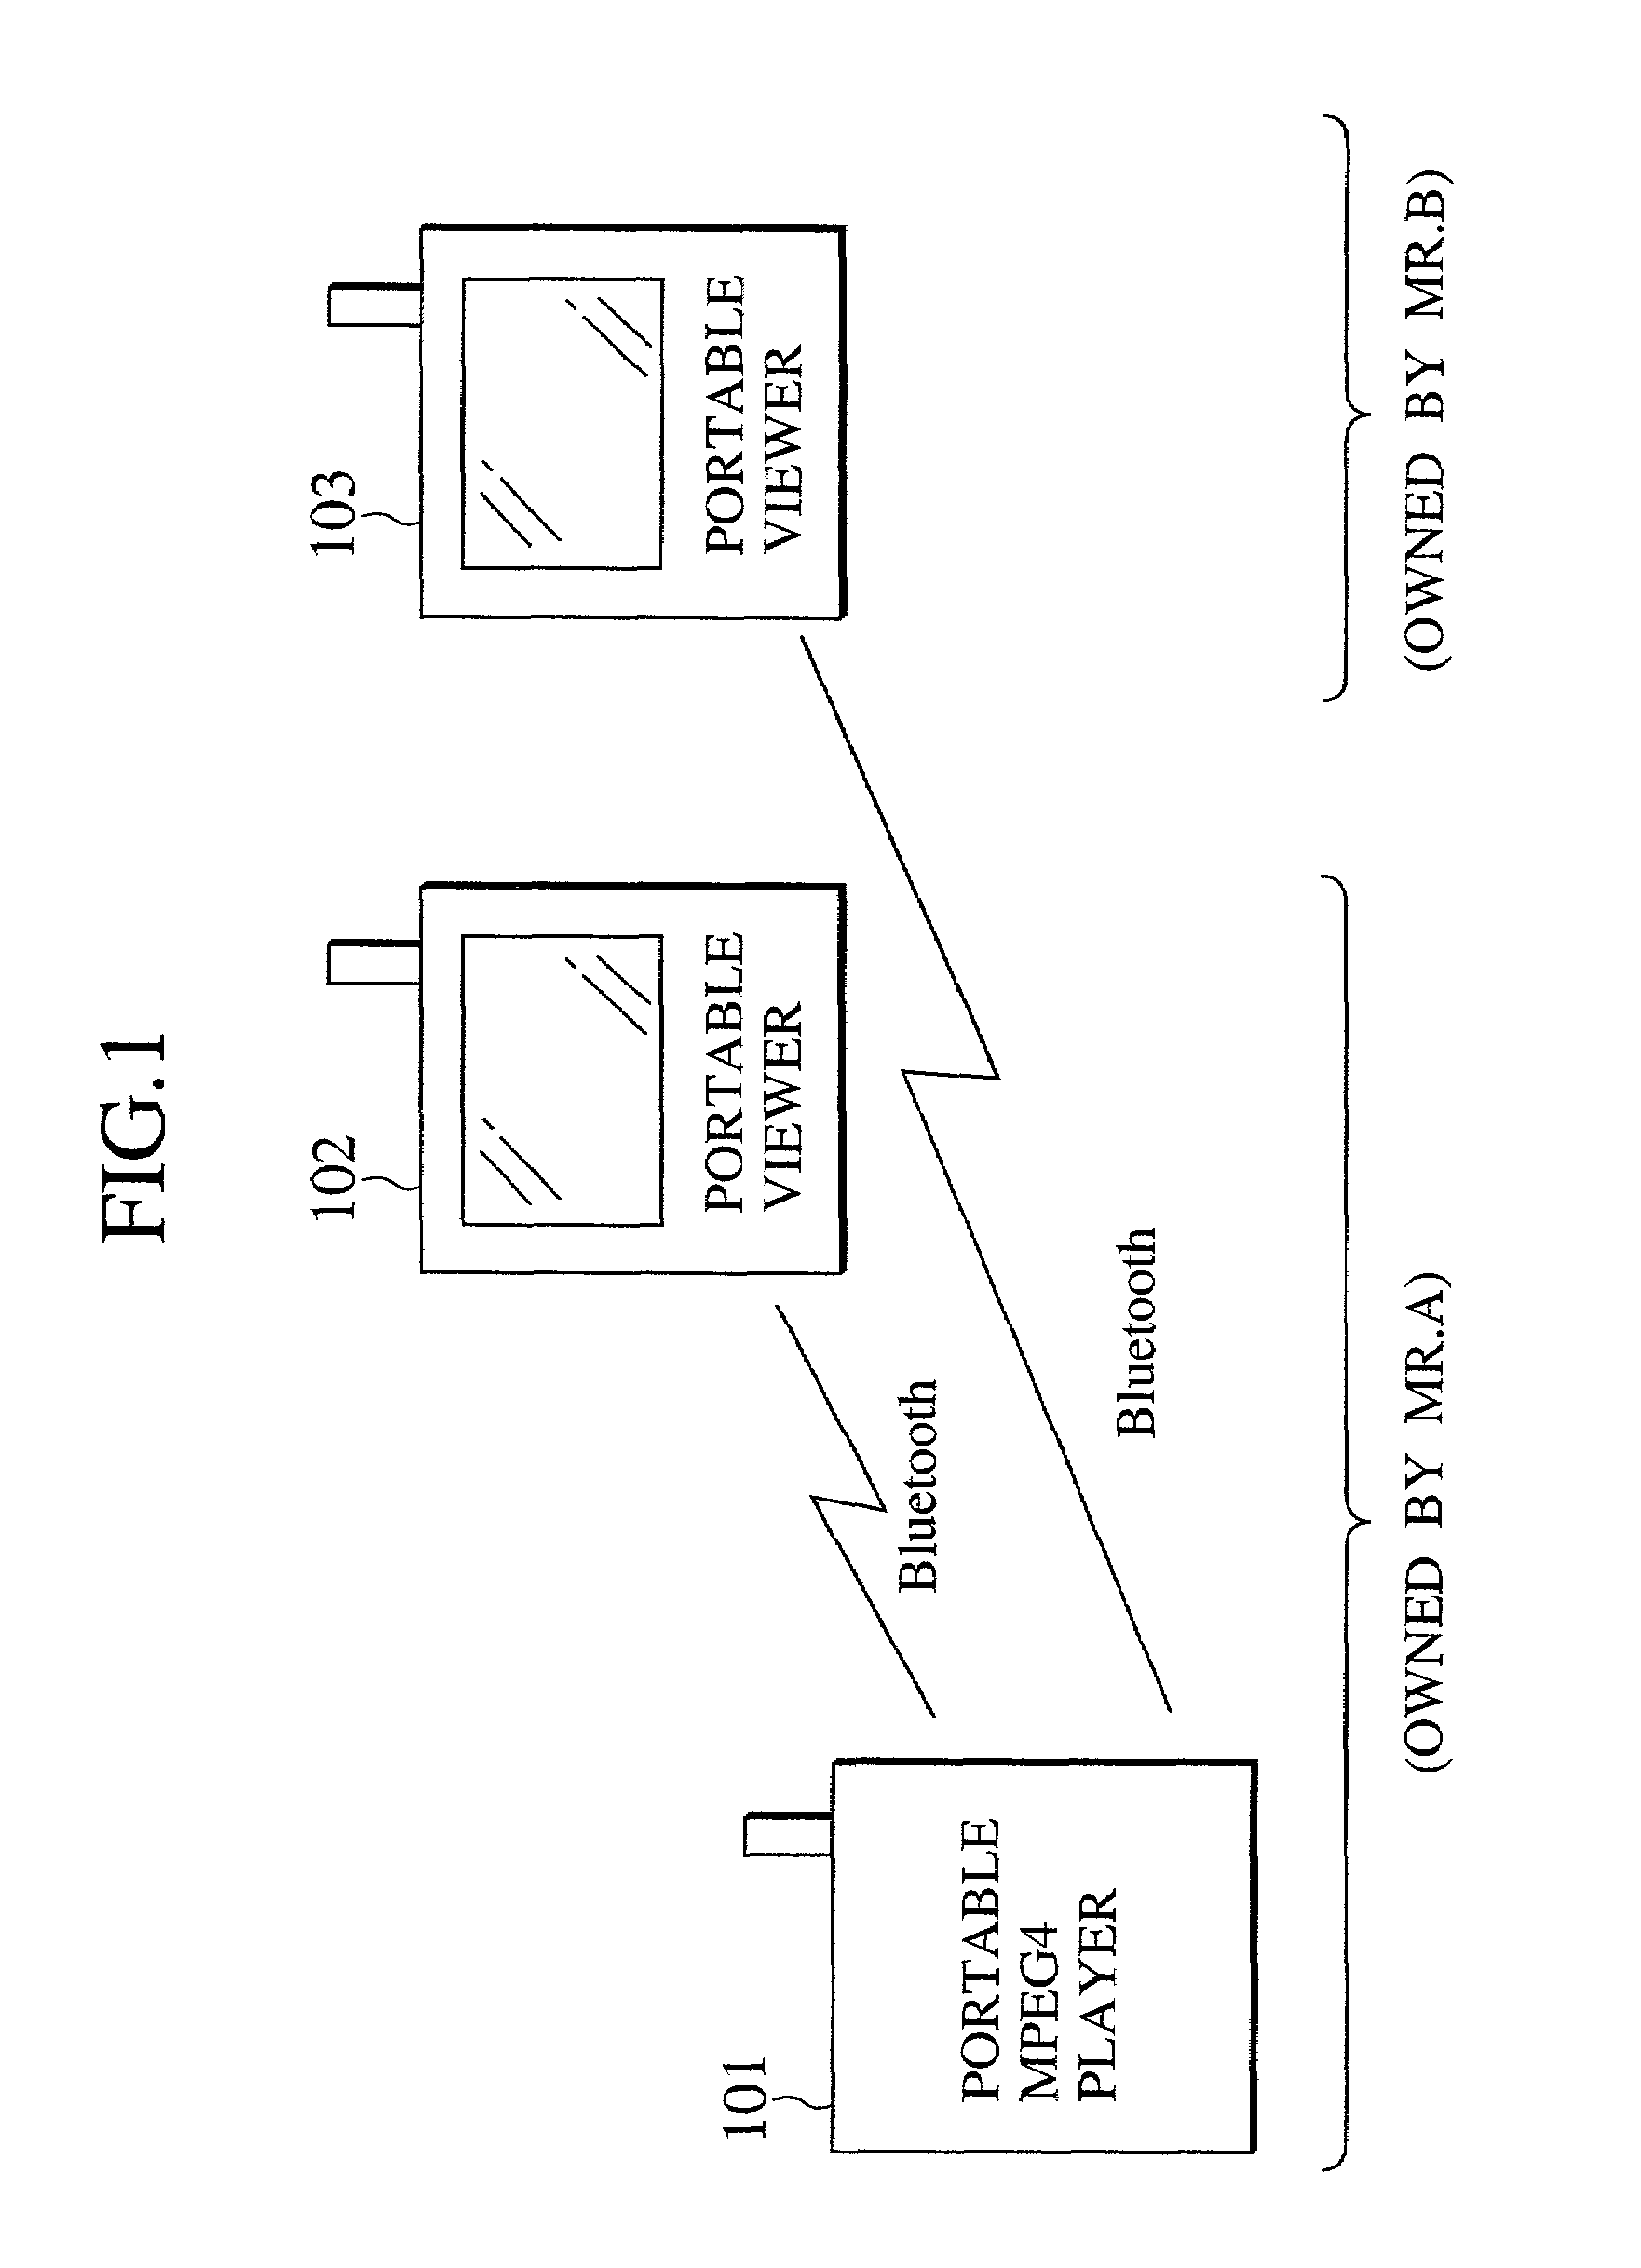 Scheme for transferring copyright protected contents data using radio link layer authentication/encryption